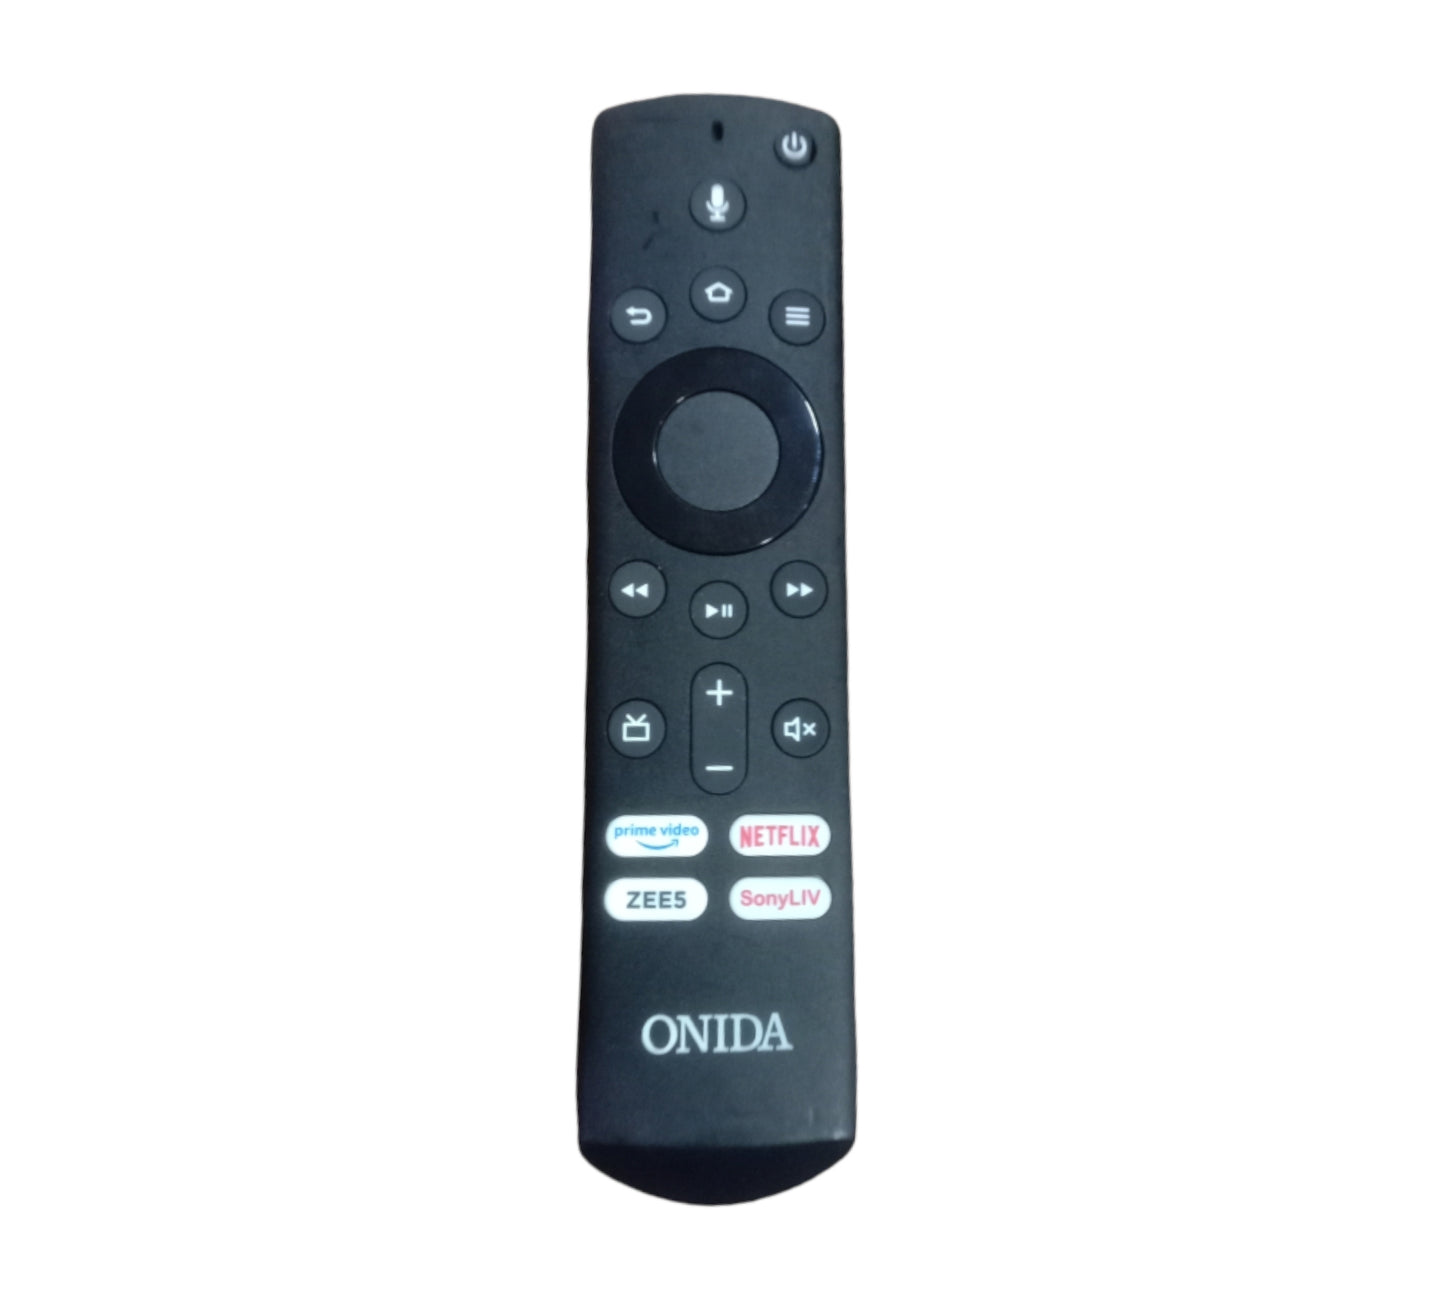 Orignal Onida  android smart tv Remote Control with prime video,Netflix, Zee5